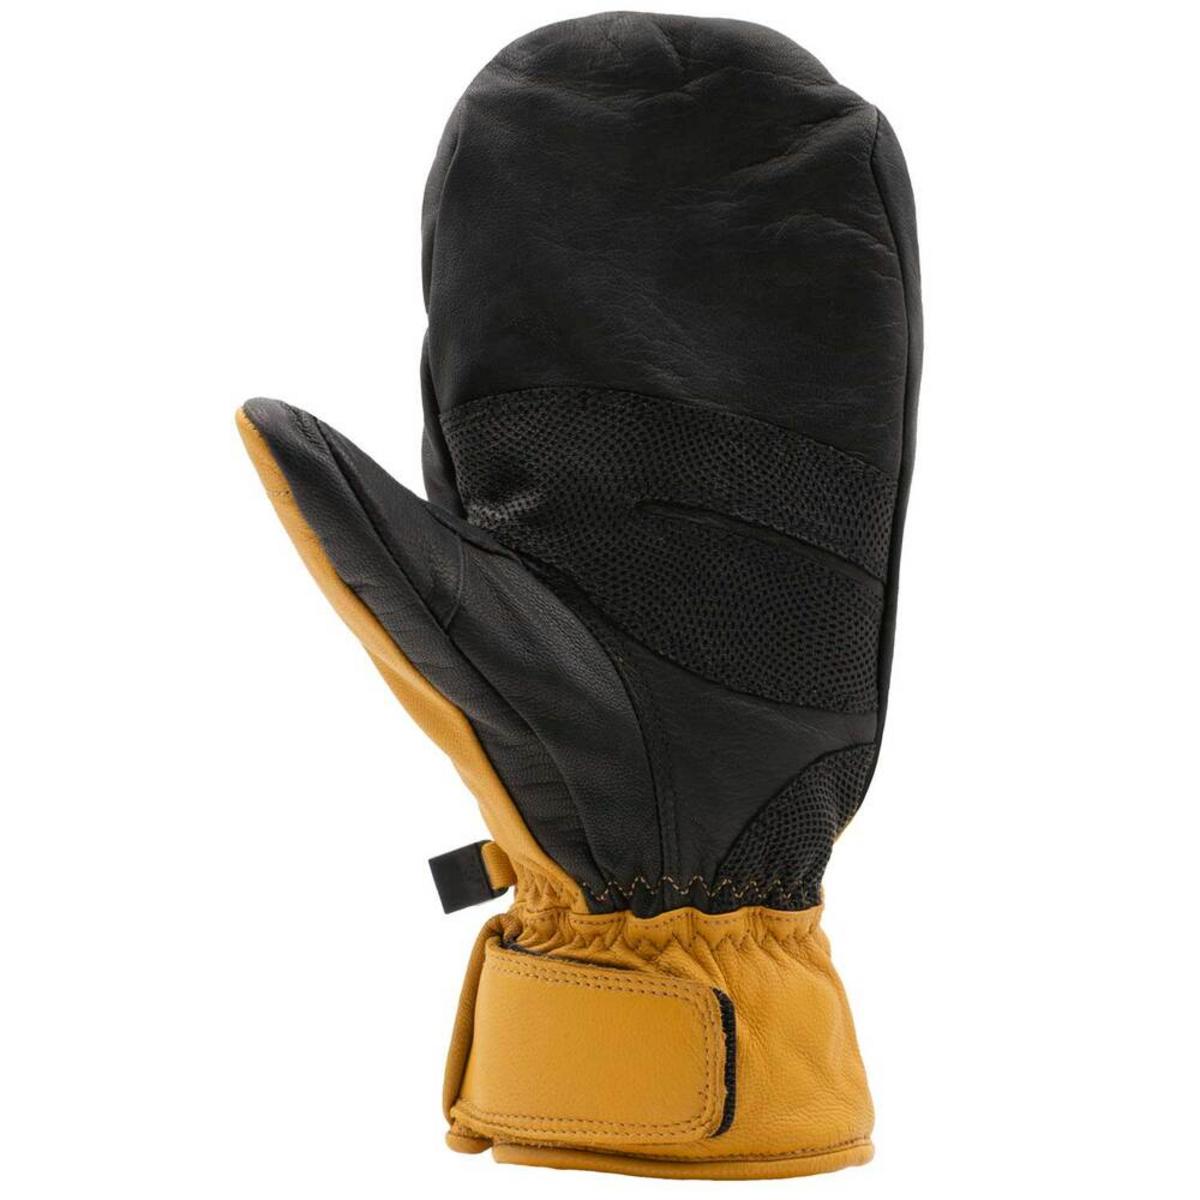 Swany Women's X-Cell Under Mittens 2.1